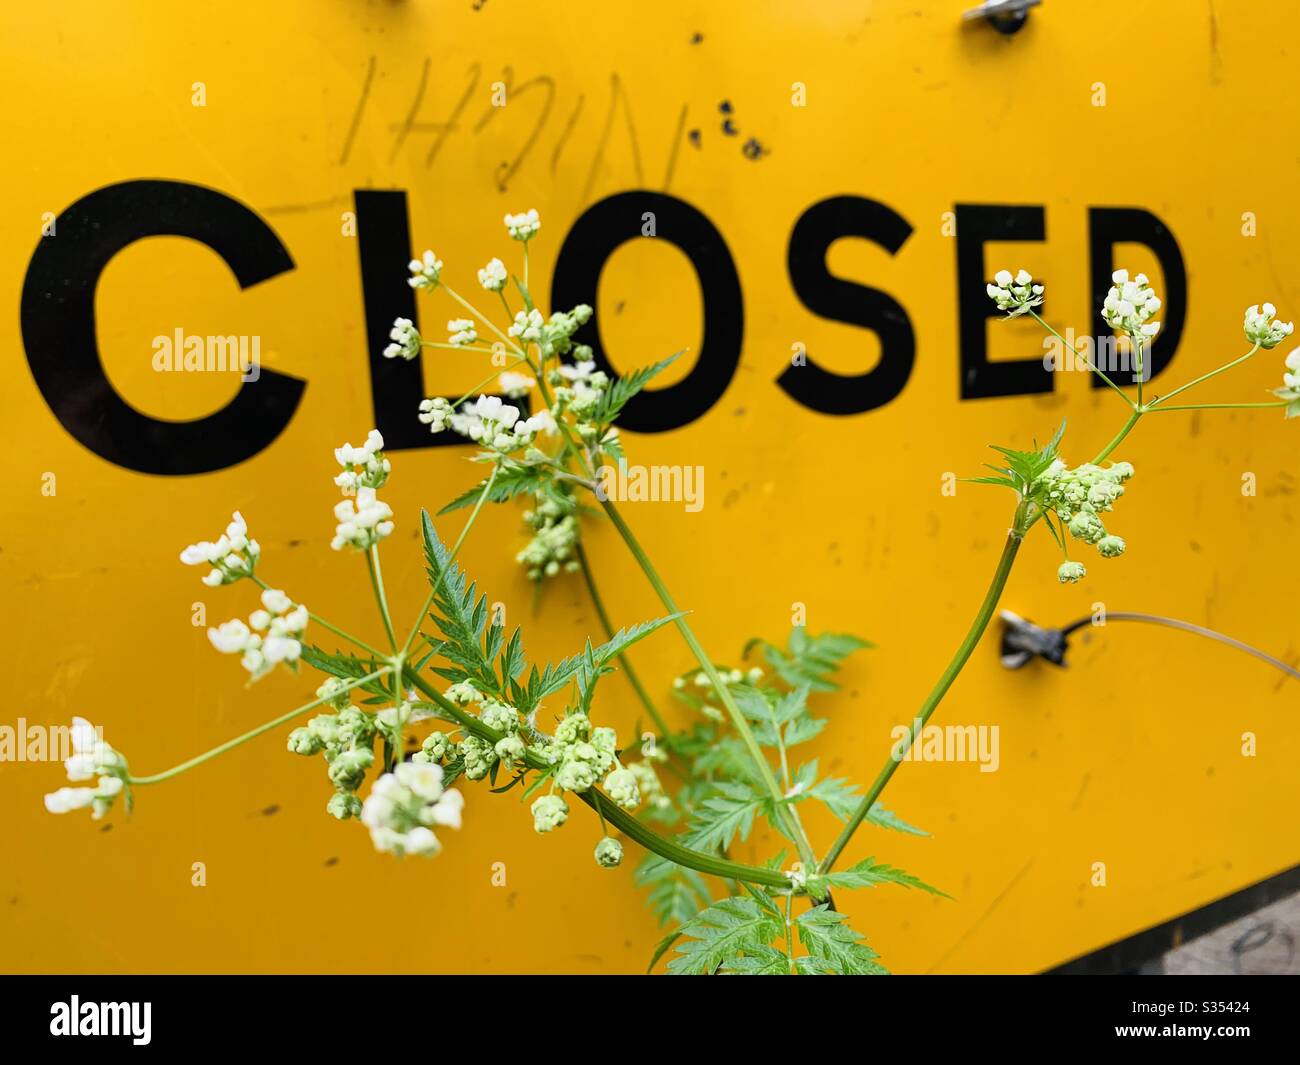 Yellow Closed sign with flowers Stock Photo